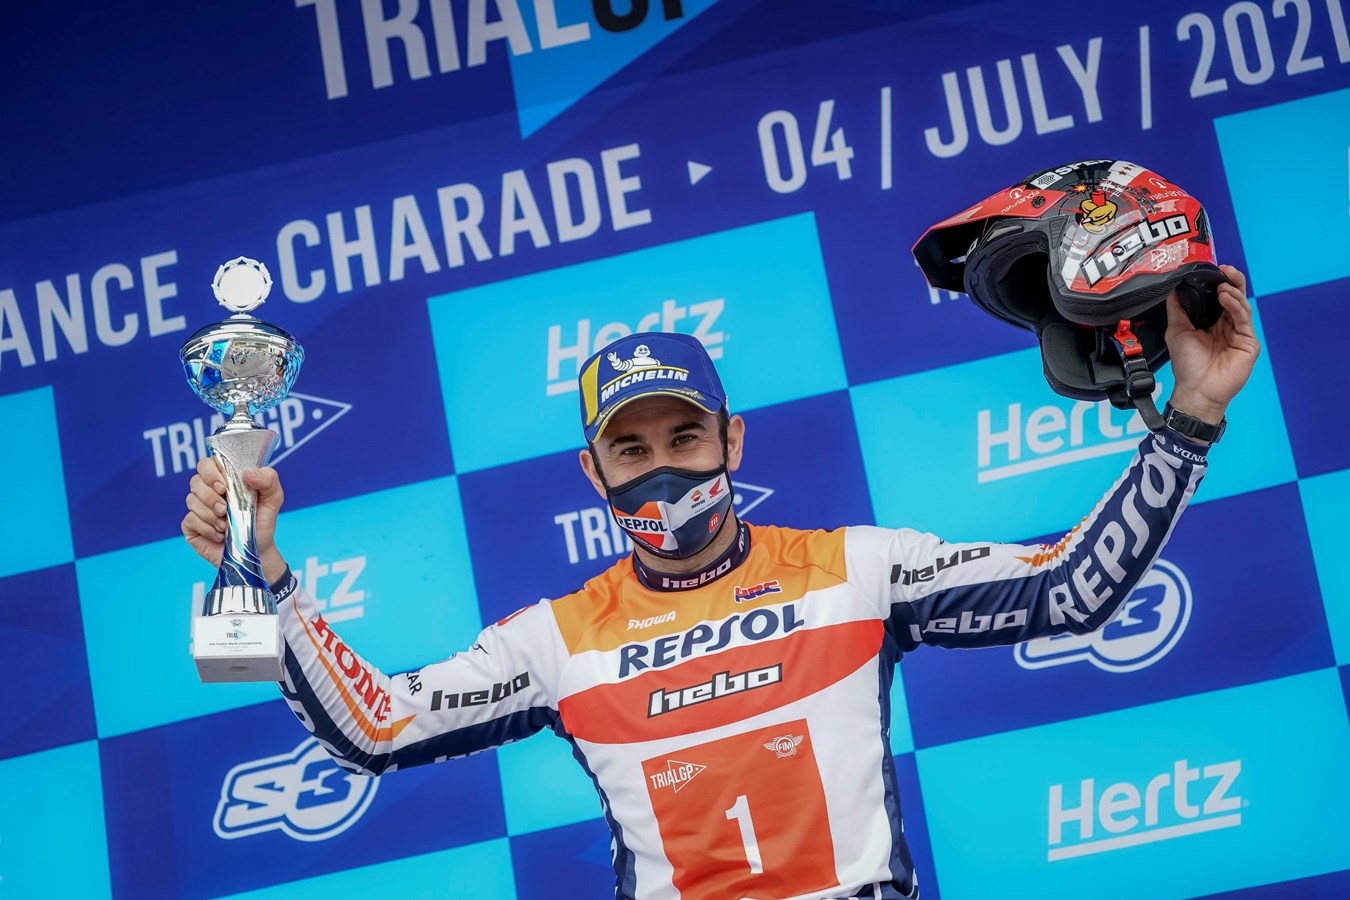 Toni Bou achieves a 120th Trial World Championship win after a superb race in France